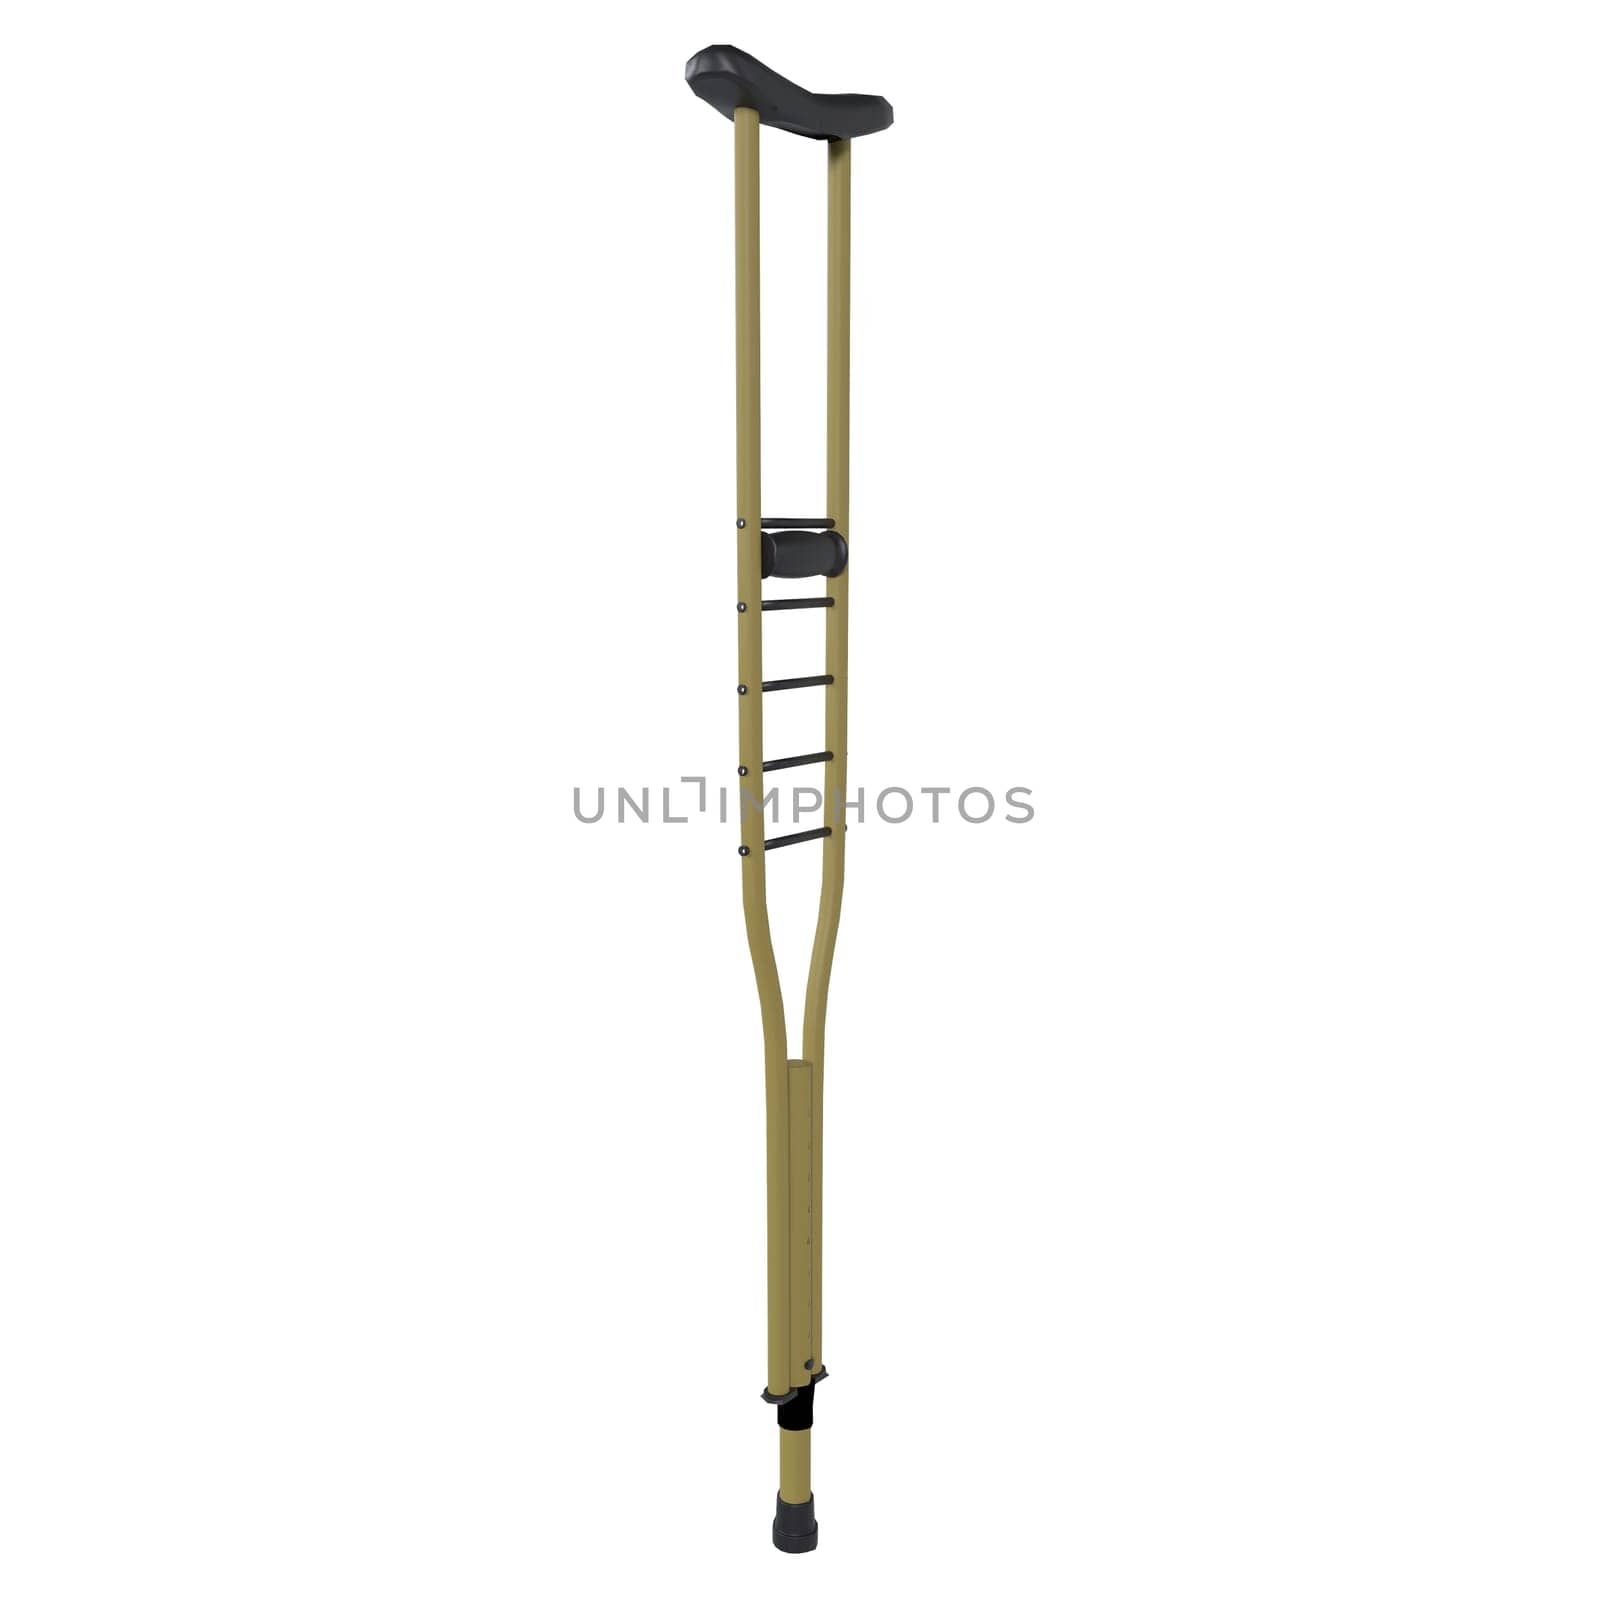 Crutches isolated on white background. High quality 3d illustration